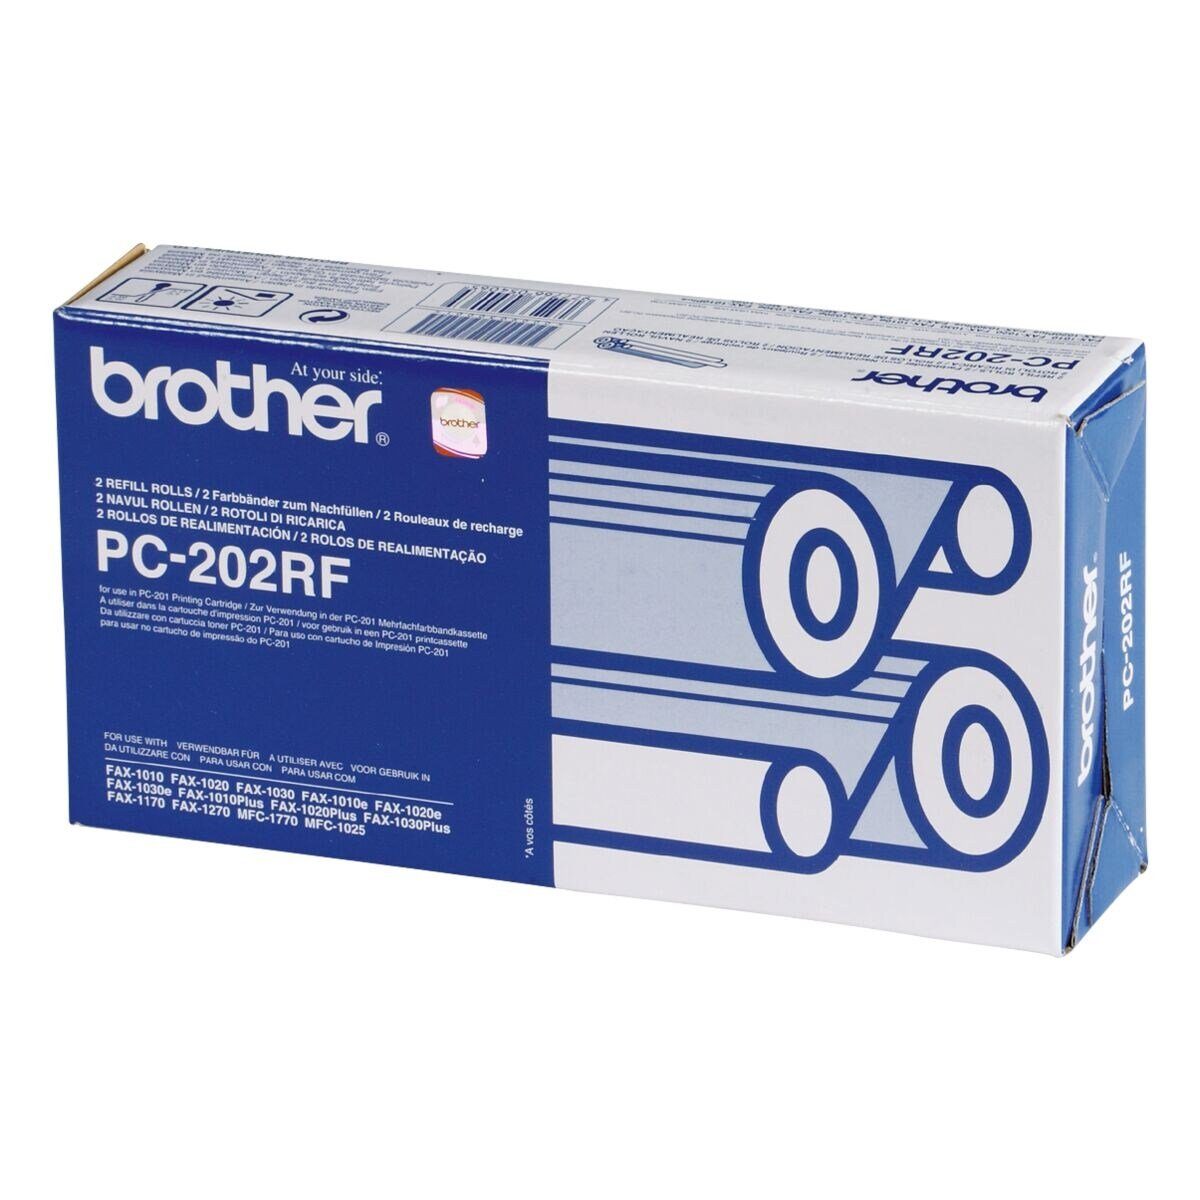 PC-202RF Thermotransfer-Rolle Brother Fax